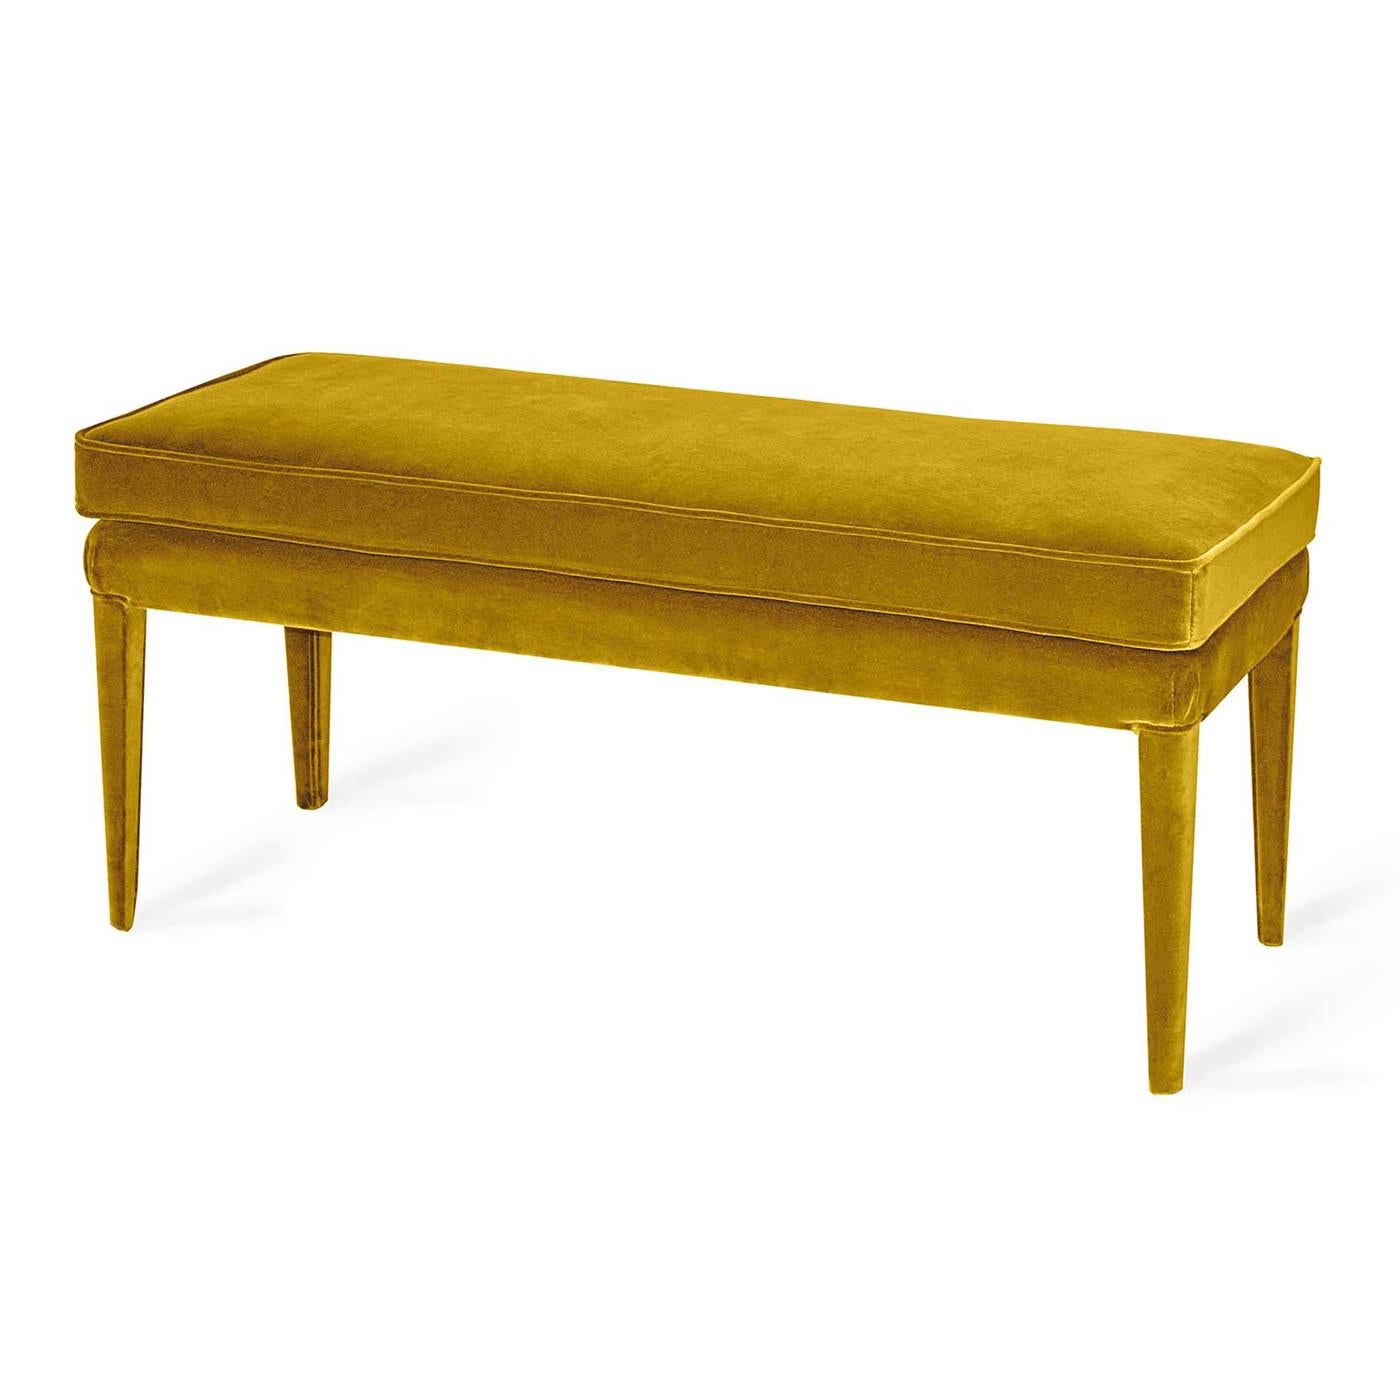 Libellula Ottoman Bench is inspired by the classical piano seat, its clear lines and luxurious finishes add a sophisticated touch to any home. This is a versatile piece that will stand the test of time in a luxurious hallway, in a living room or at